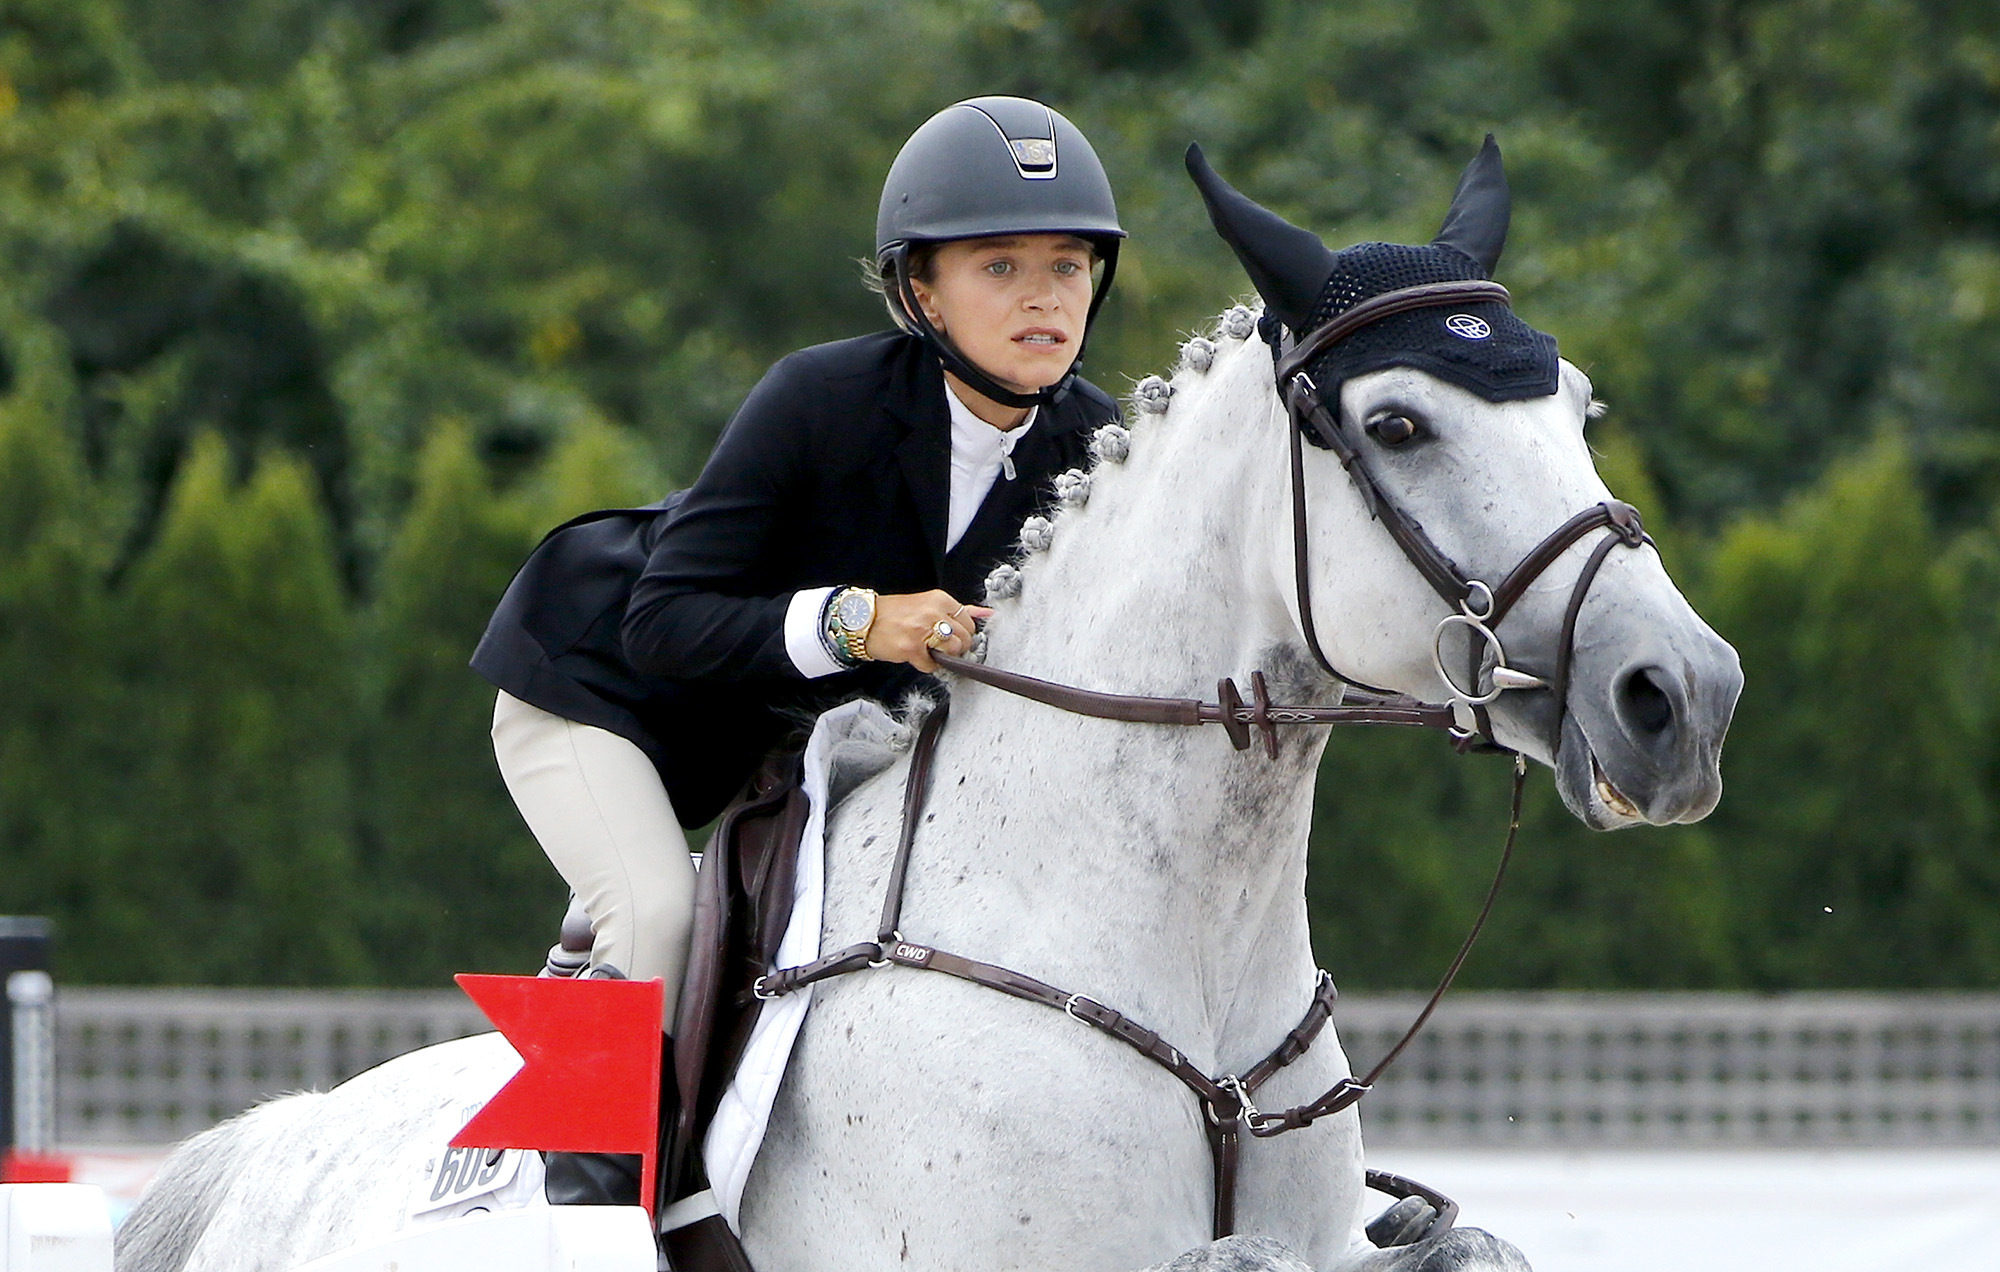 Photo of Mary-Kate Olsen Wears All Her Wedding Jewelry While Competing in Hamptons Horse Show